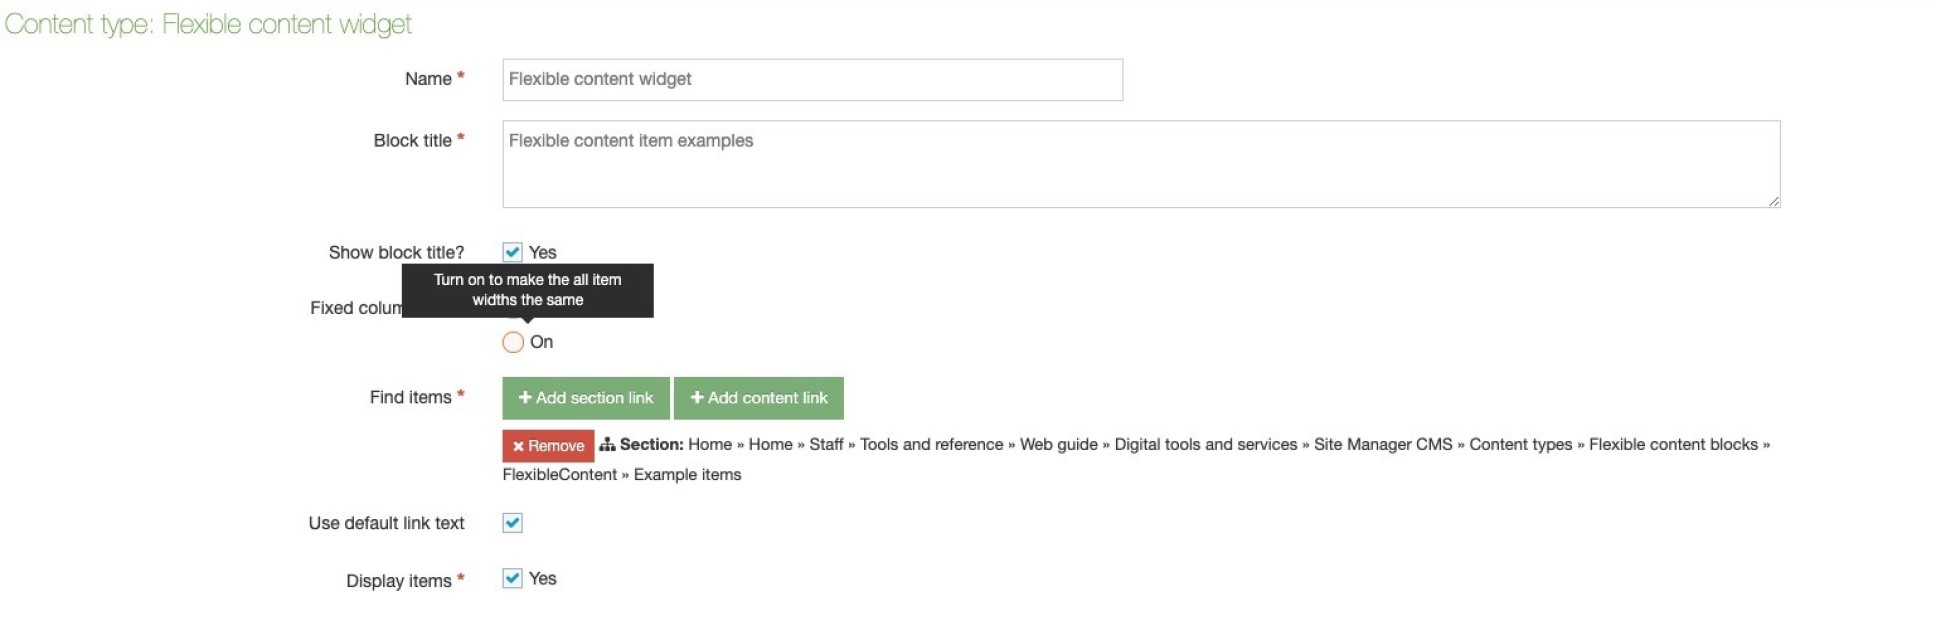 Completed Flexible content widget form with the Fixed column width 'On' option highlighted